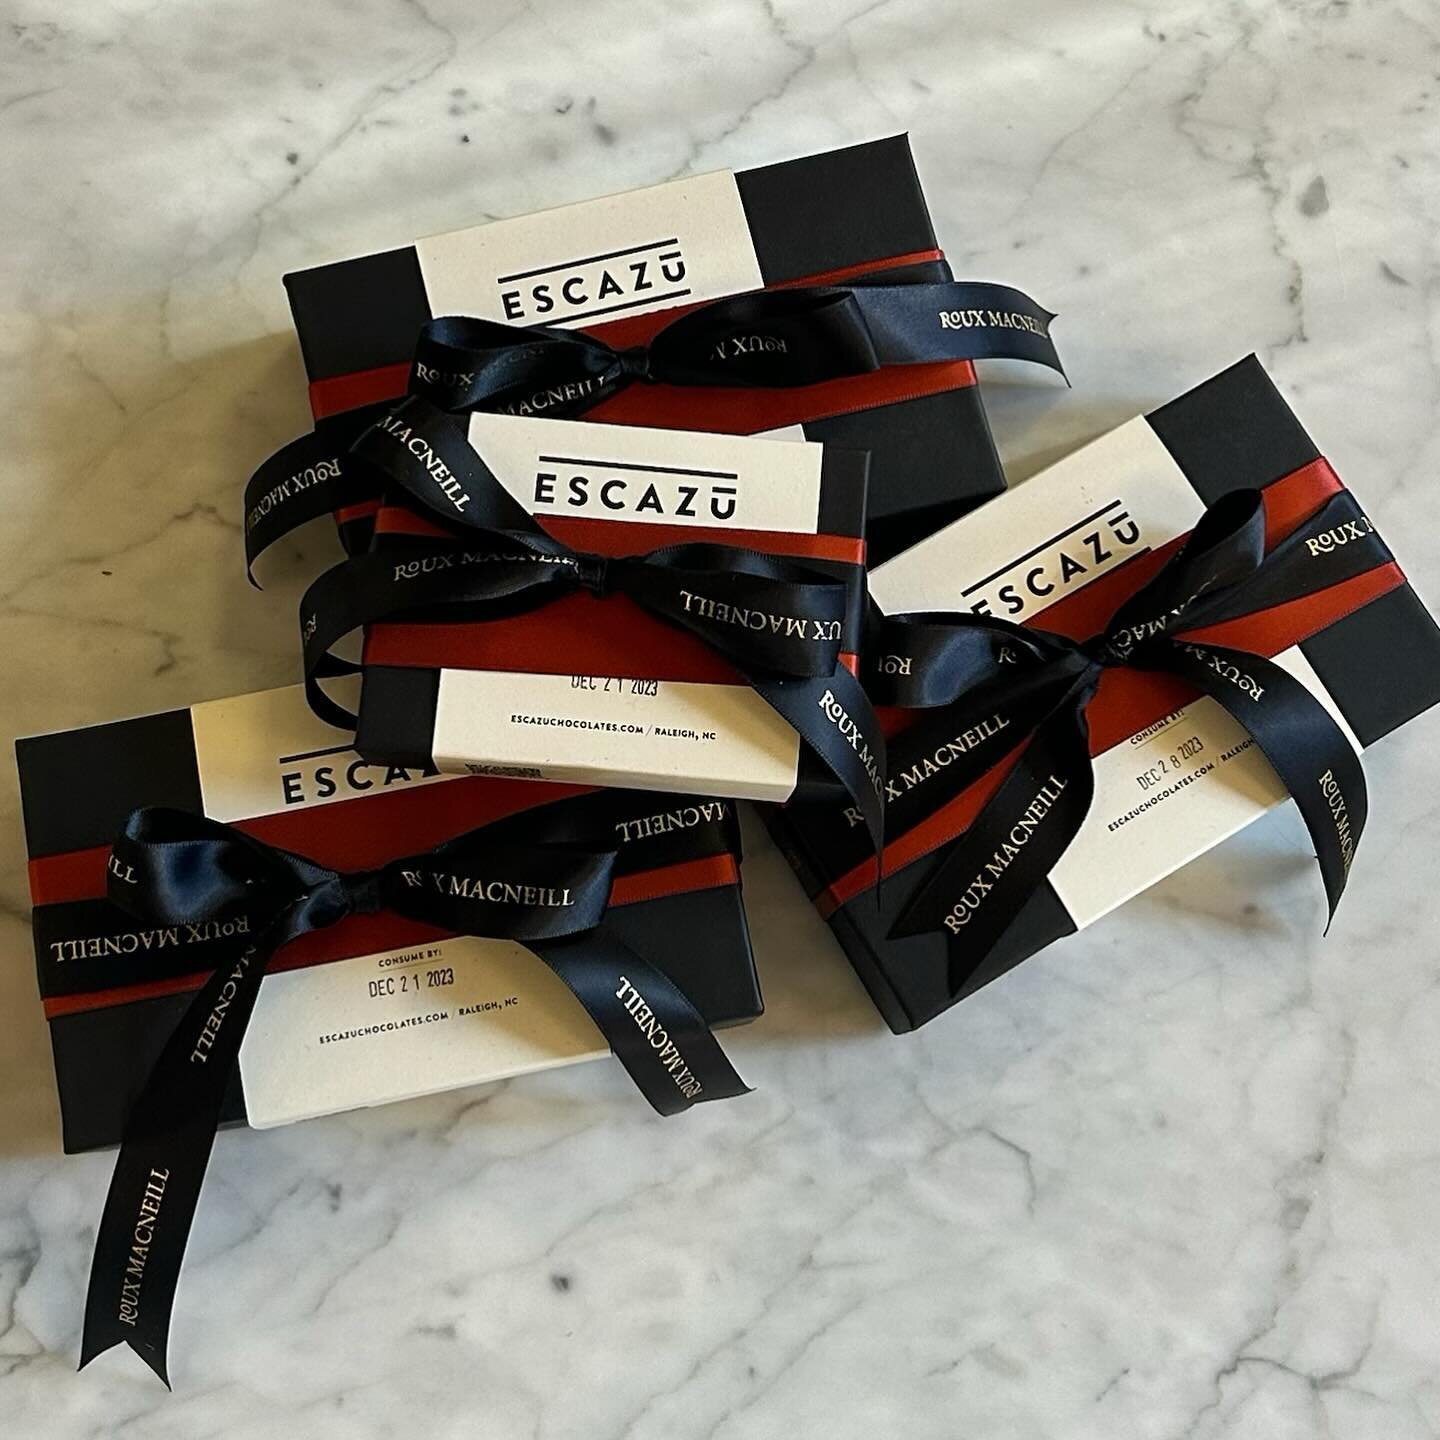 Gifting local and in style with the help of our friends at @escazuchocolates and @westonfarms 🖤 Our new branded ribbon adds a special touch!

#rouxmacstudio #rouxmacneillstudio